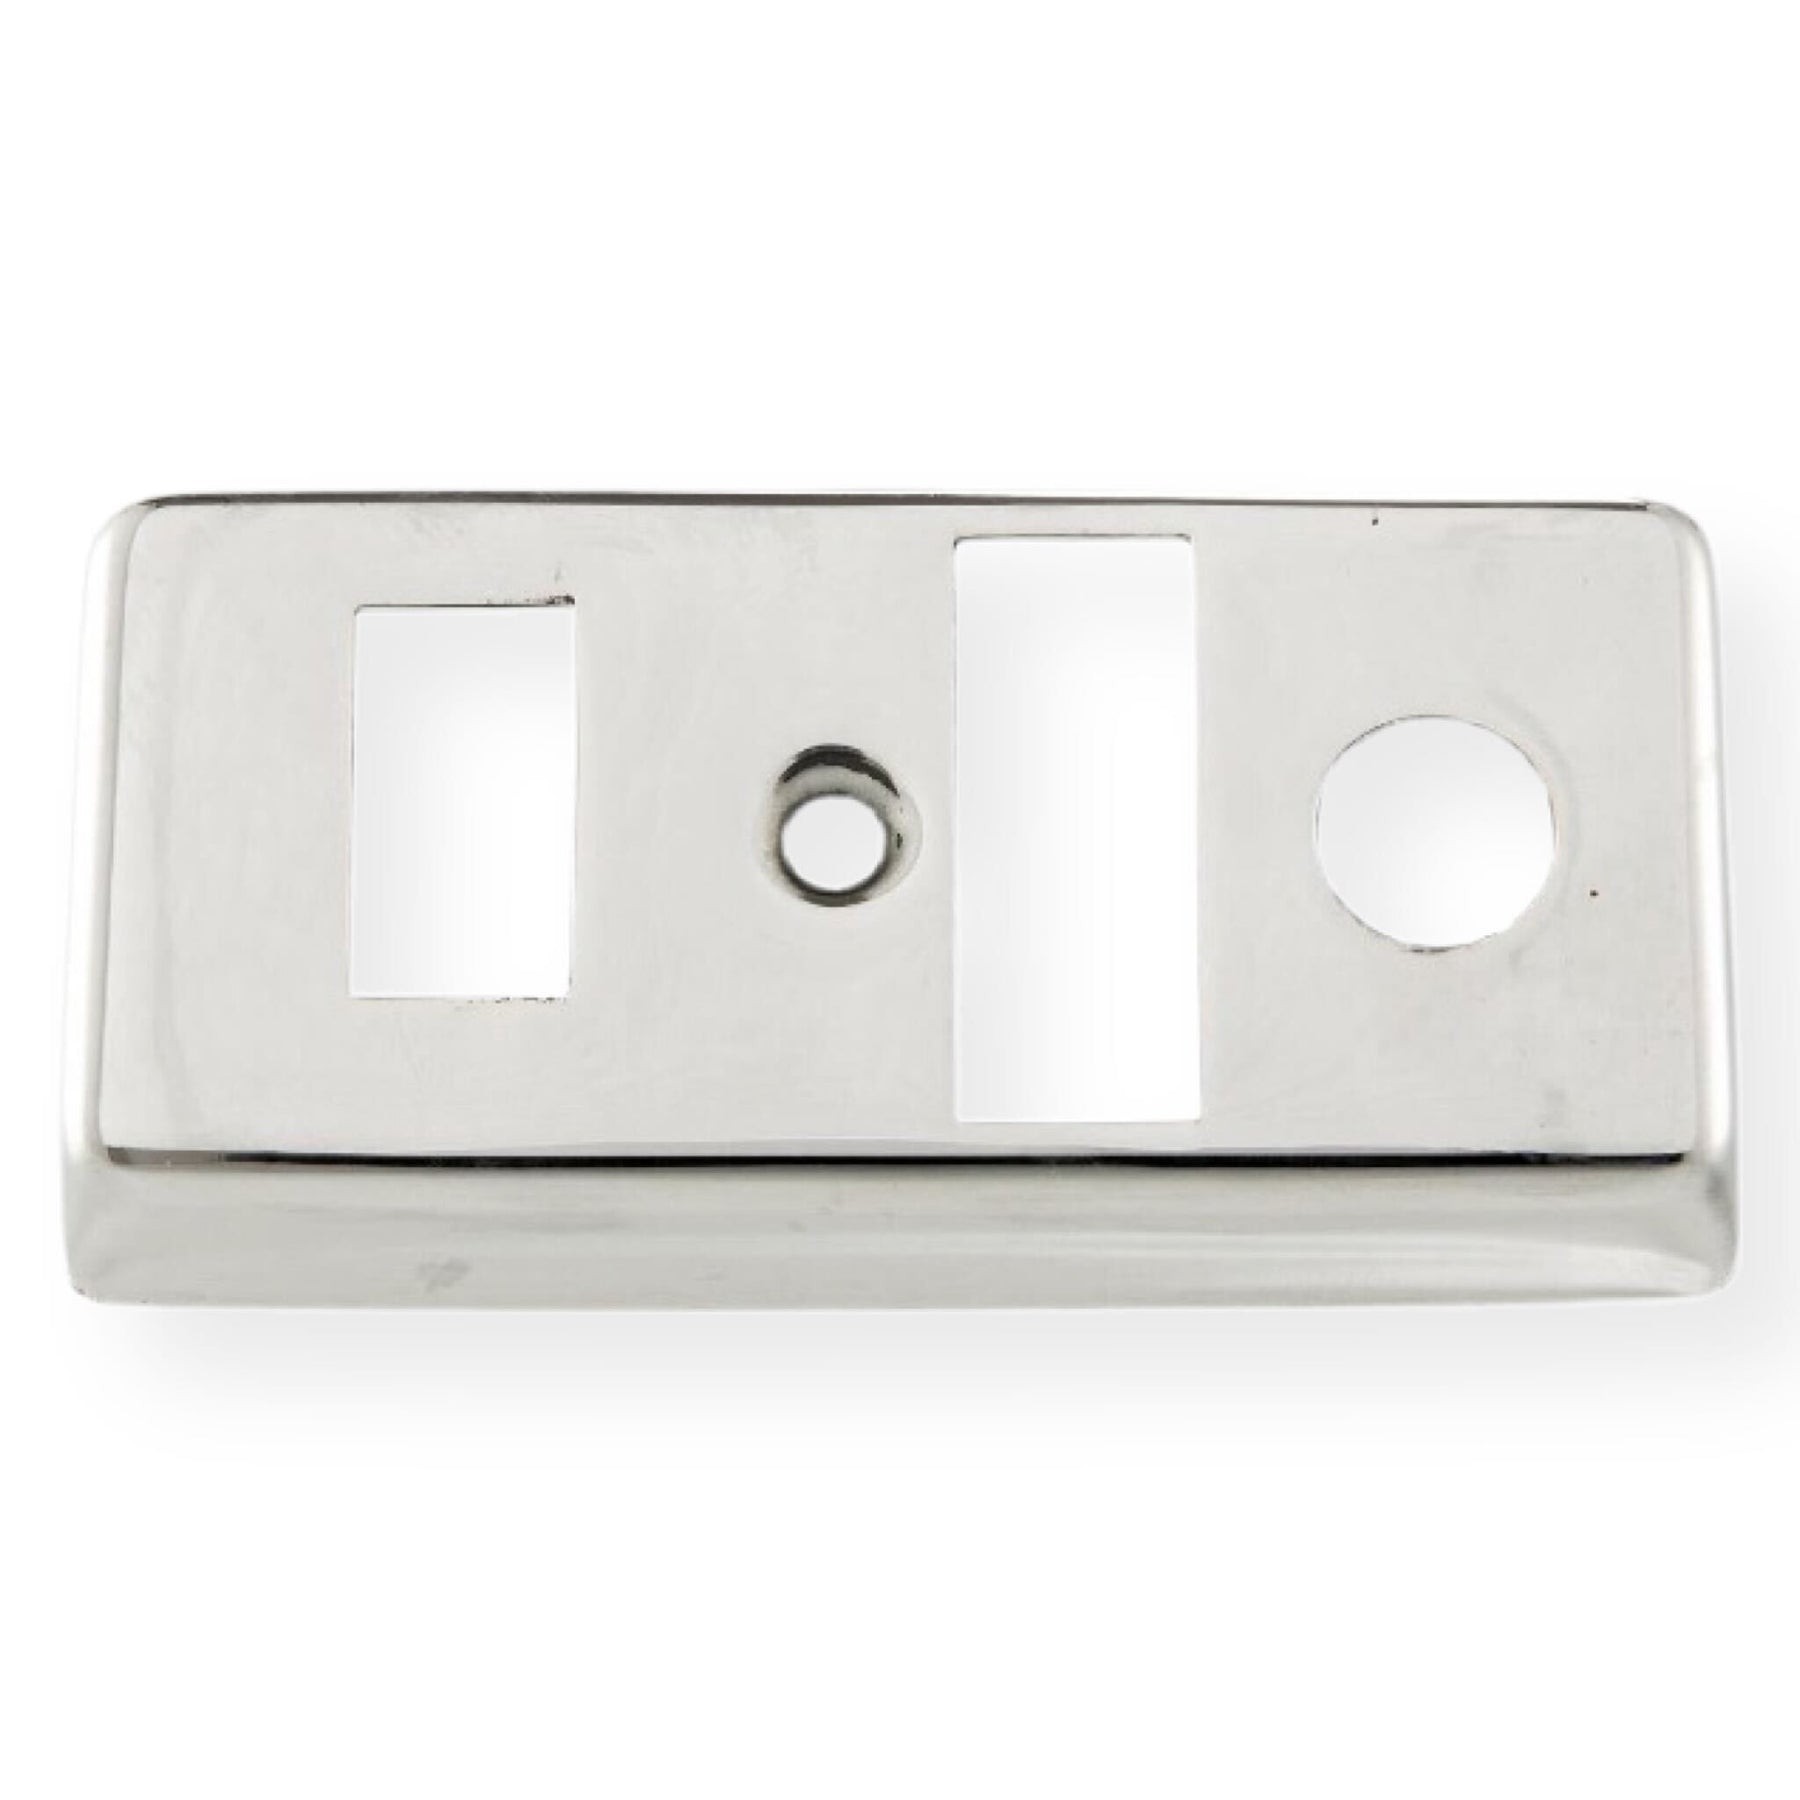 Vespa P125 P150X P200E Light Switch Cover - Polished Stainless Steel